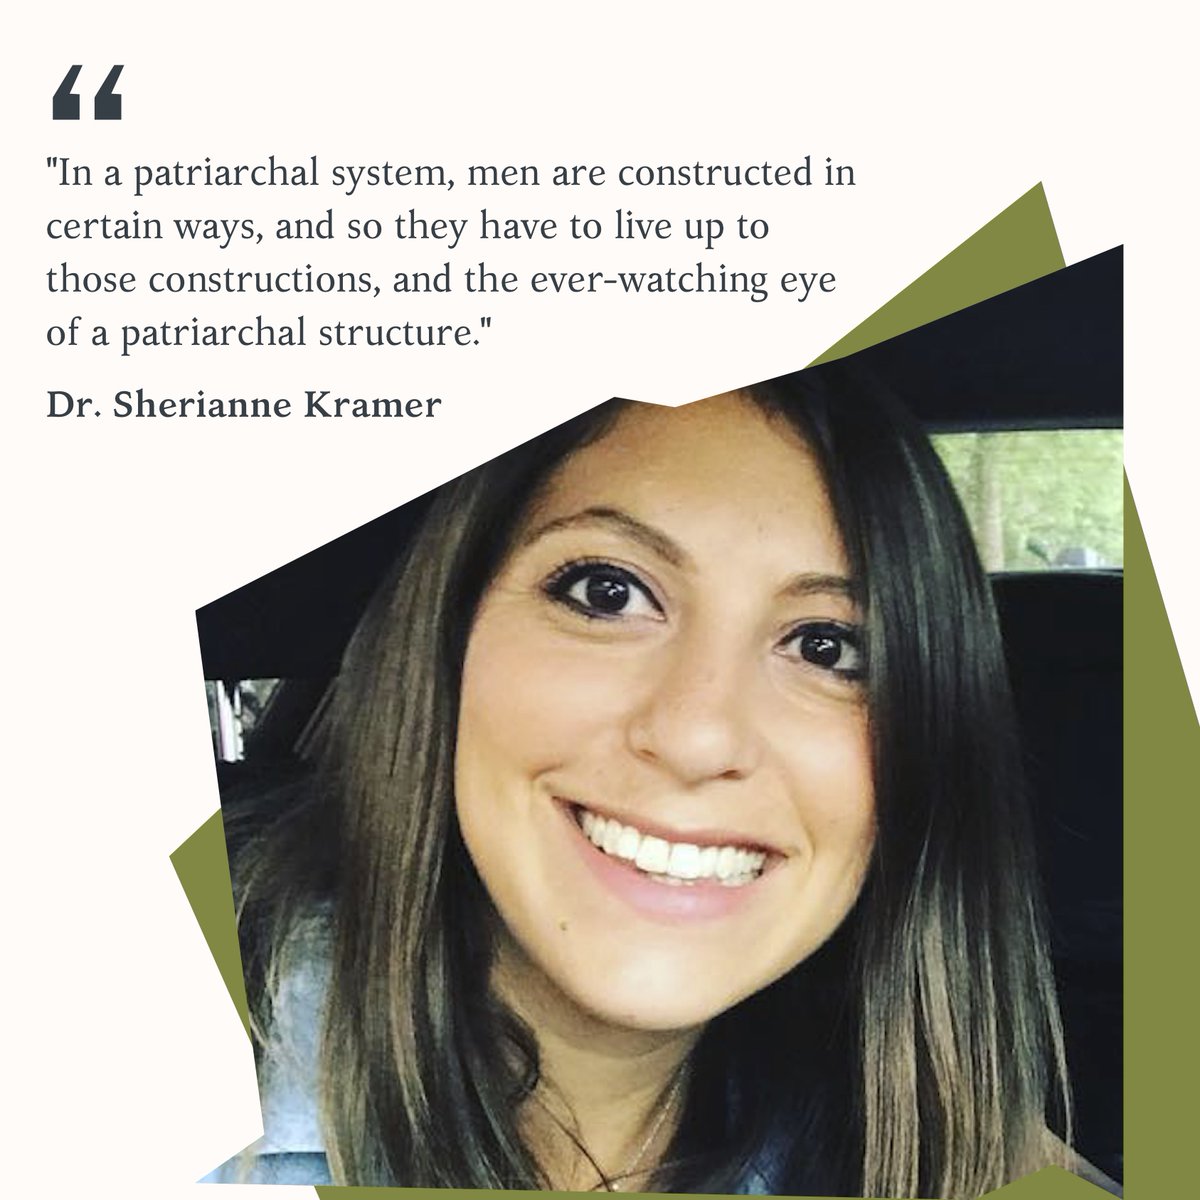 Edited quotes from Dr. Sherianne Kramer for our new magazine!

#sexualviolenceagainstthemalegender #gender #conflict #africa #humanrights #peaceandjustice #sexualviolenceinconflict #malesurvivors #healthservices